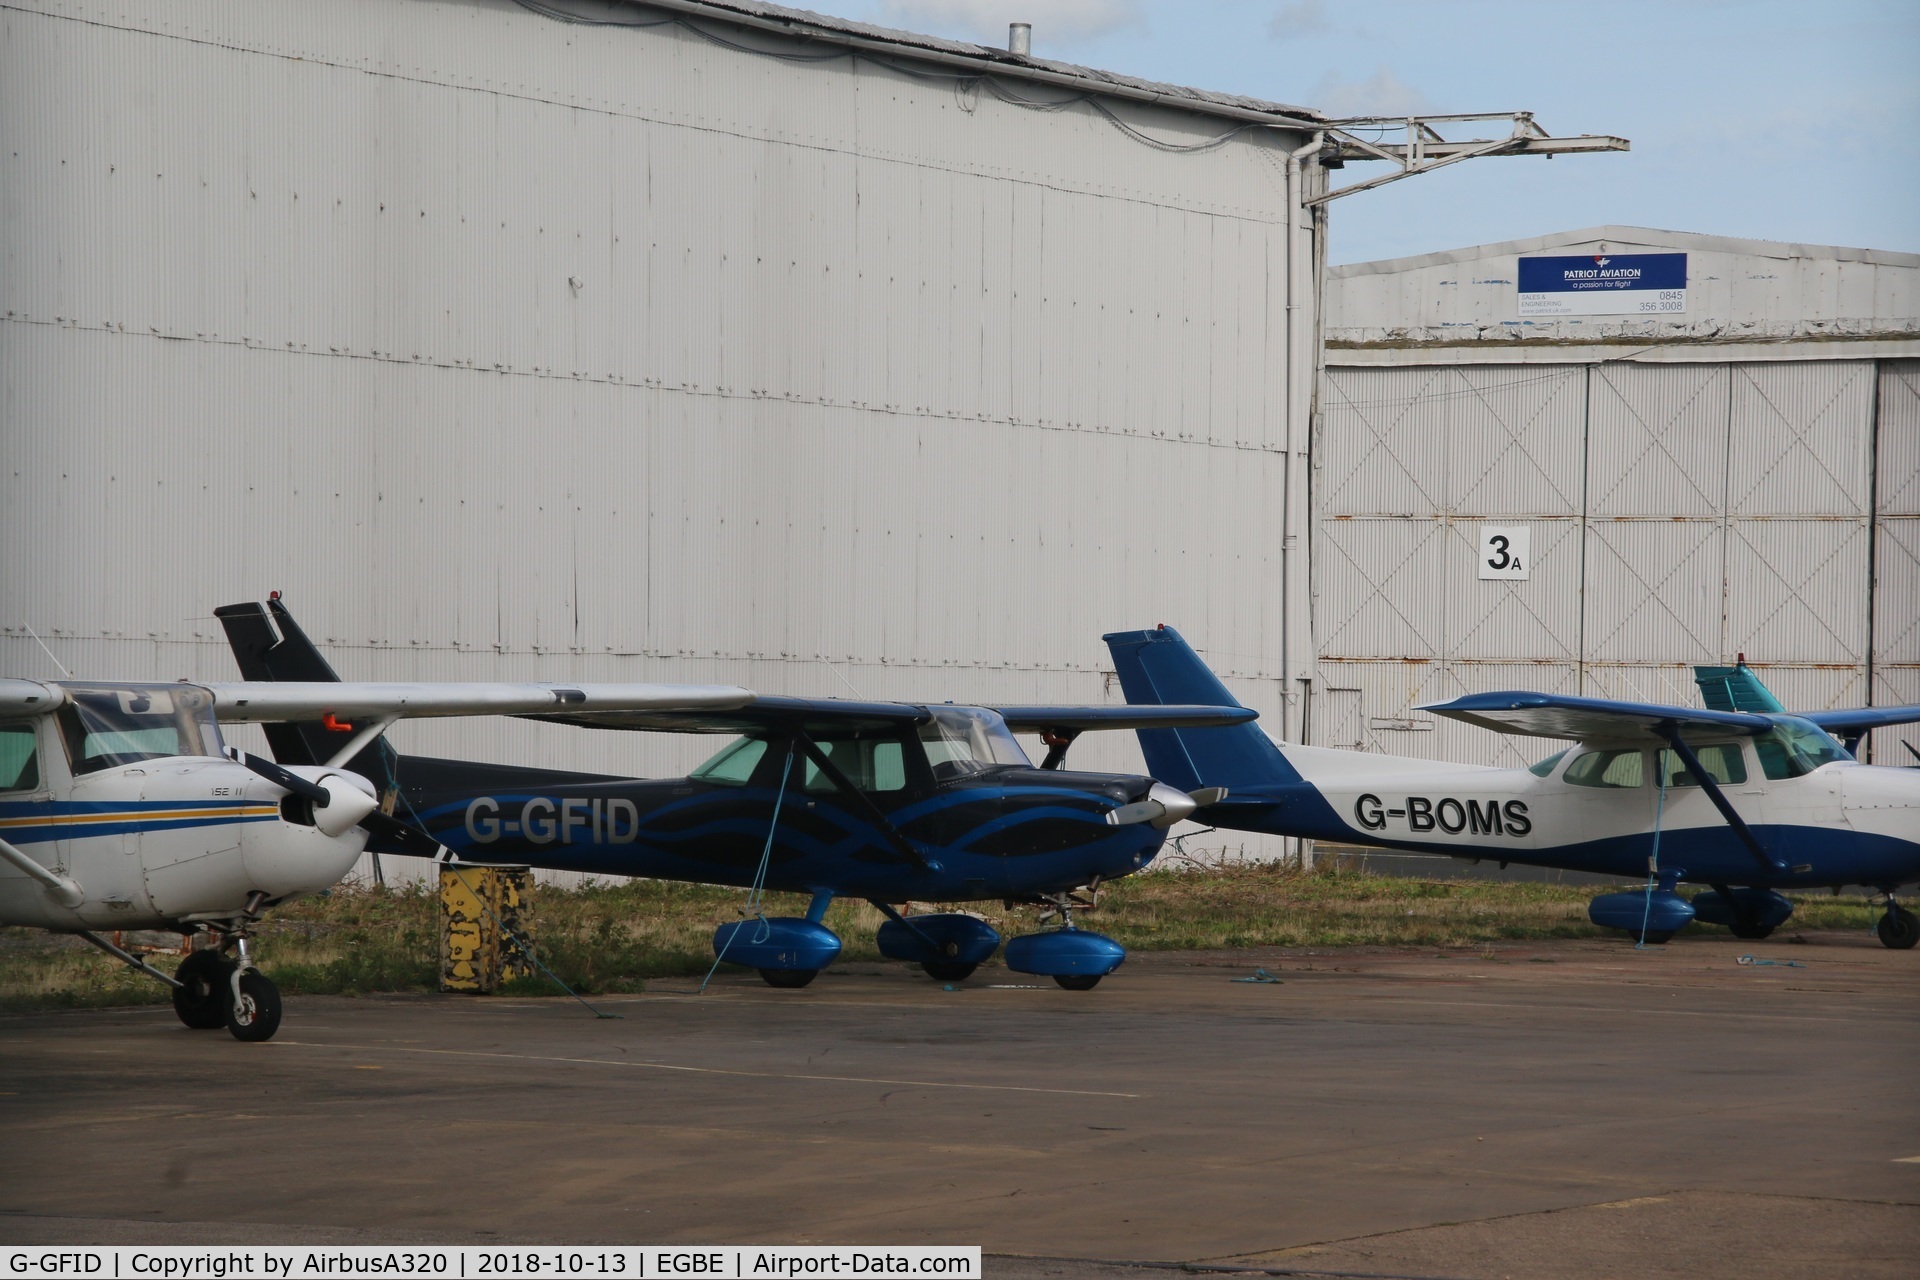 G-GFID, 1979 Cessna 152 C/N 152-82649, Seen parked at Coventry